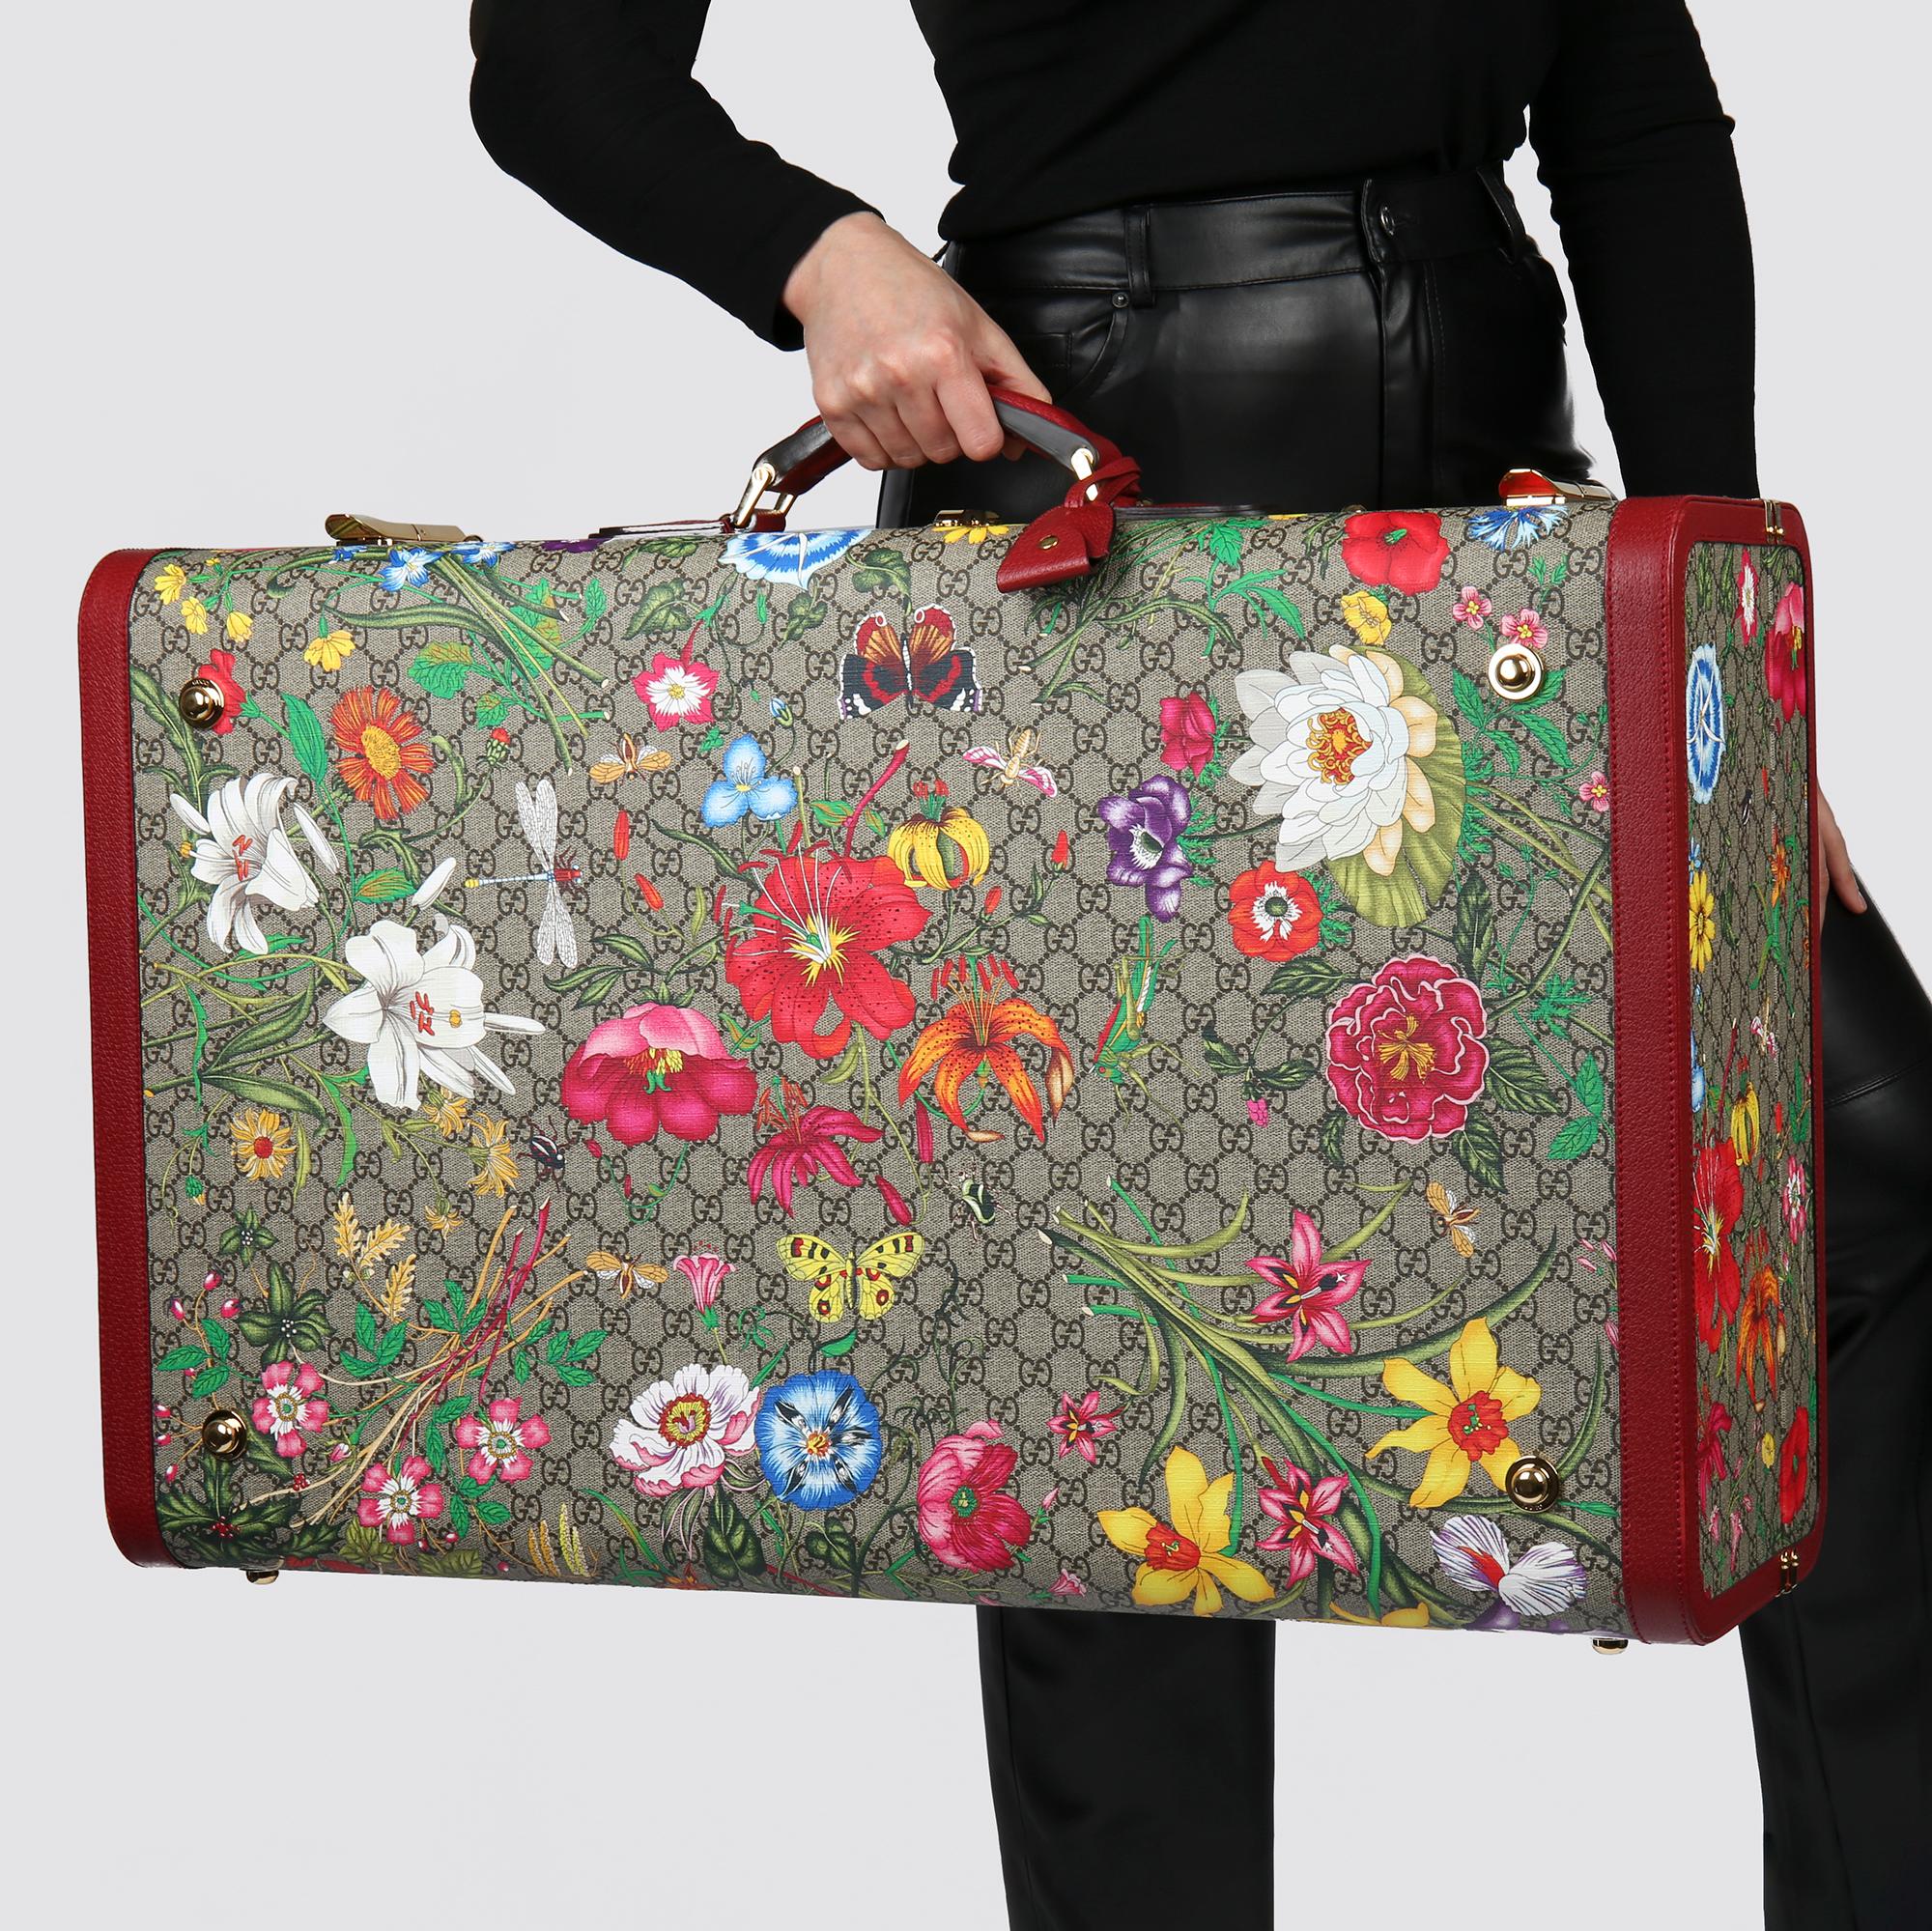 GUCCI
GG Flora Coated Canvas & Red Pigskin Leather Maxi Suitcase Trunk 

Xupes Reference: HB3768
Serial Number: 603765 613120
Age (Circa): 2021
Accompanied By: Gucci Dust Bag, Clochette, Keys, Care Booklet
Authenticity Details: Date Stamp (Made in